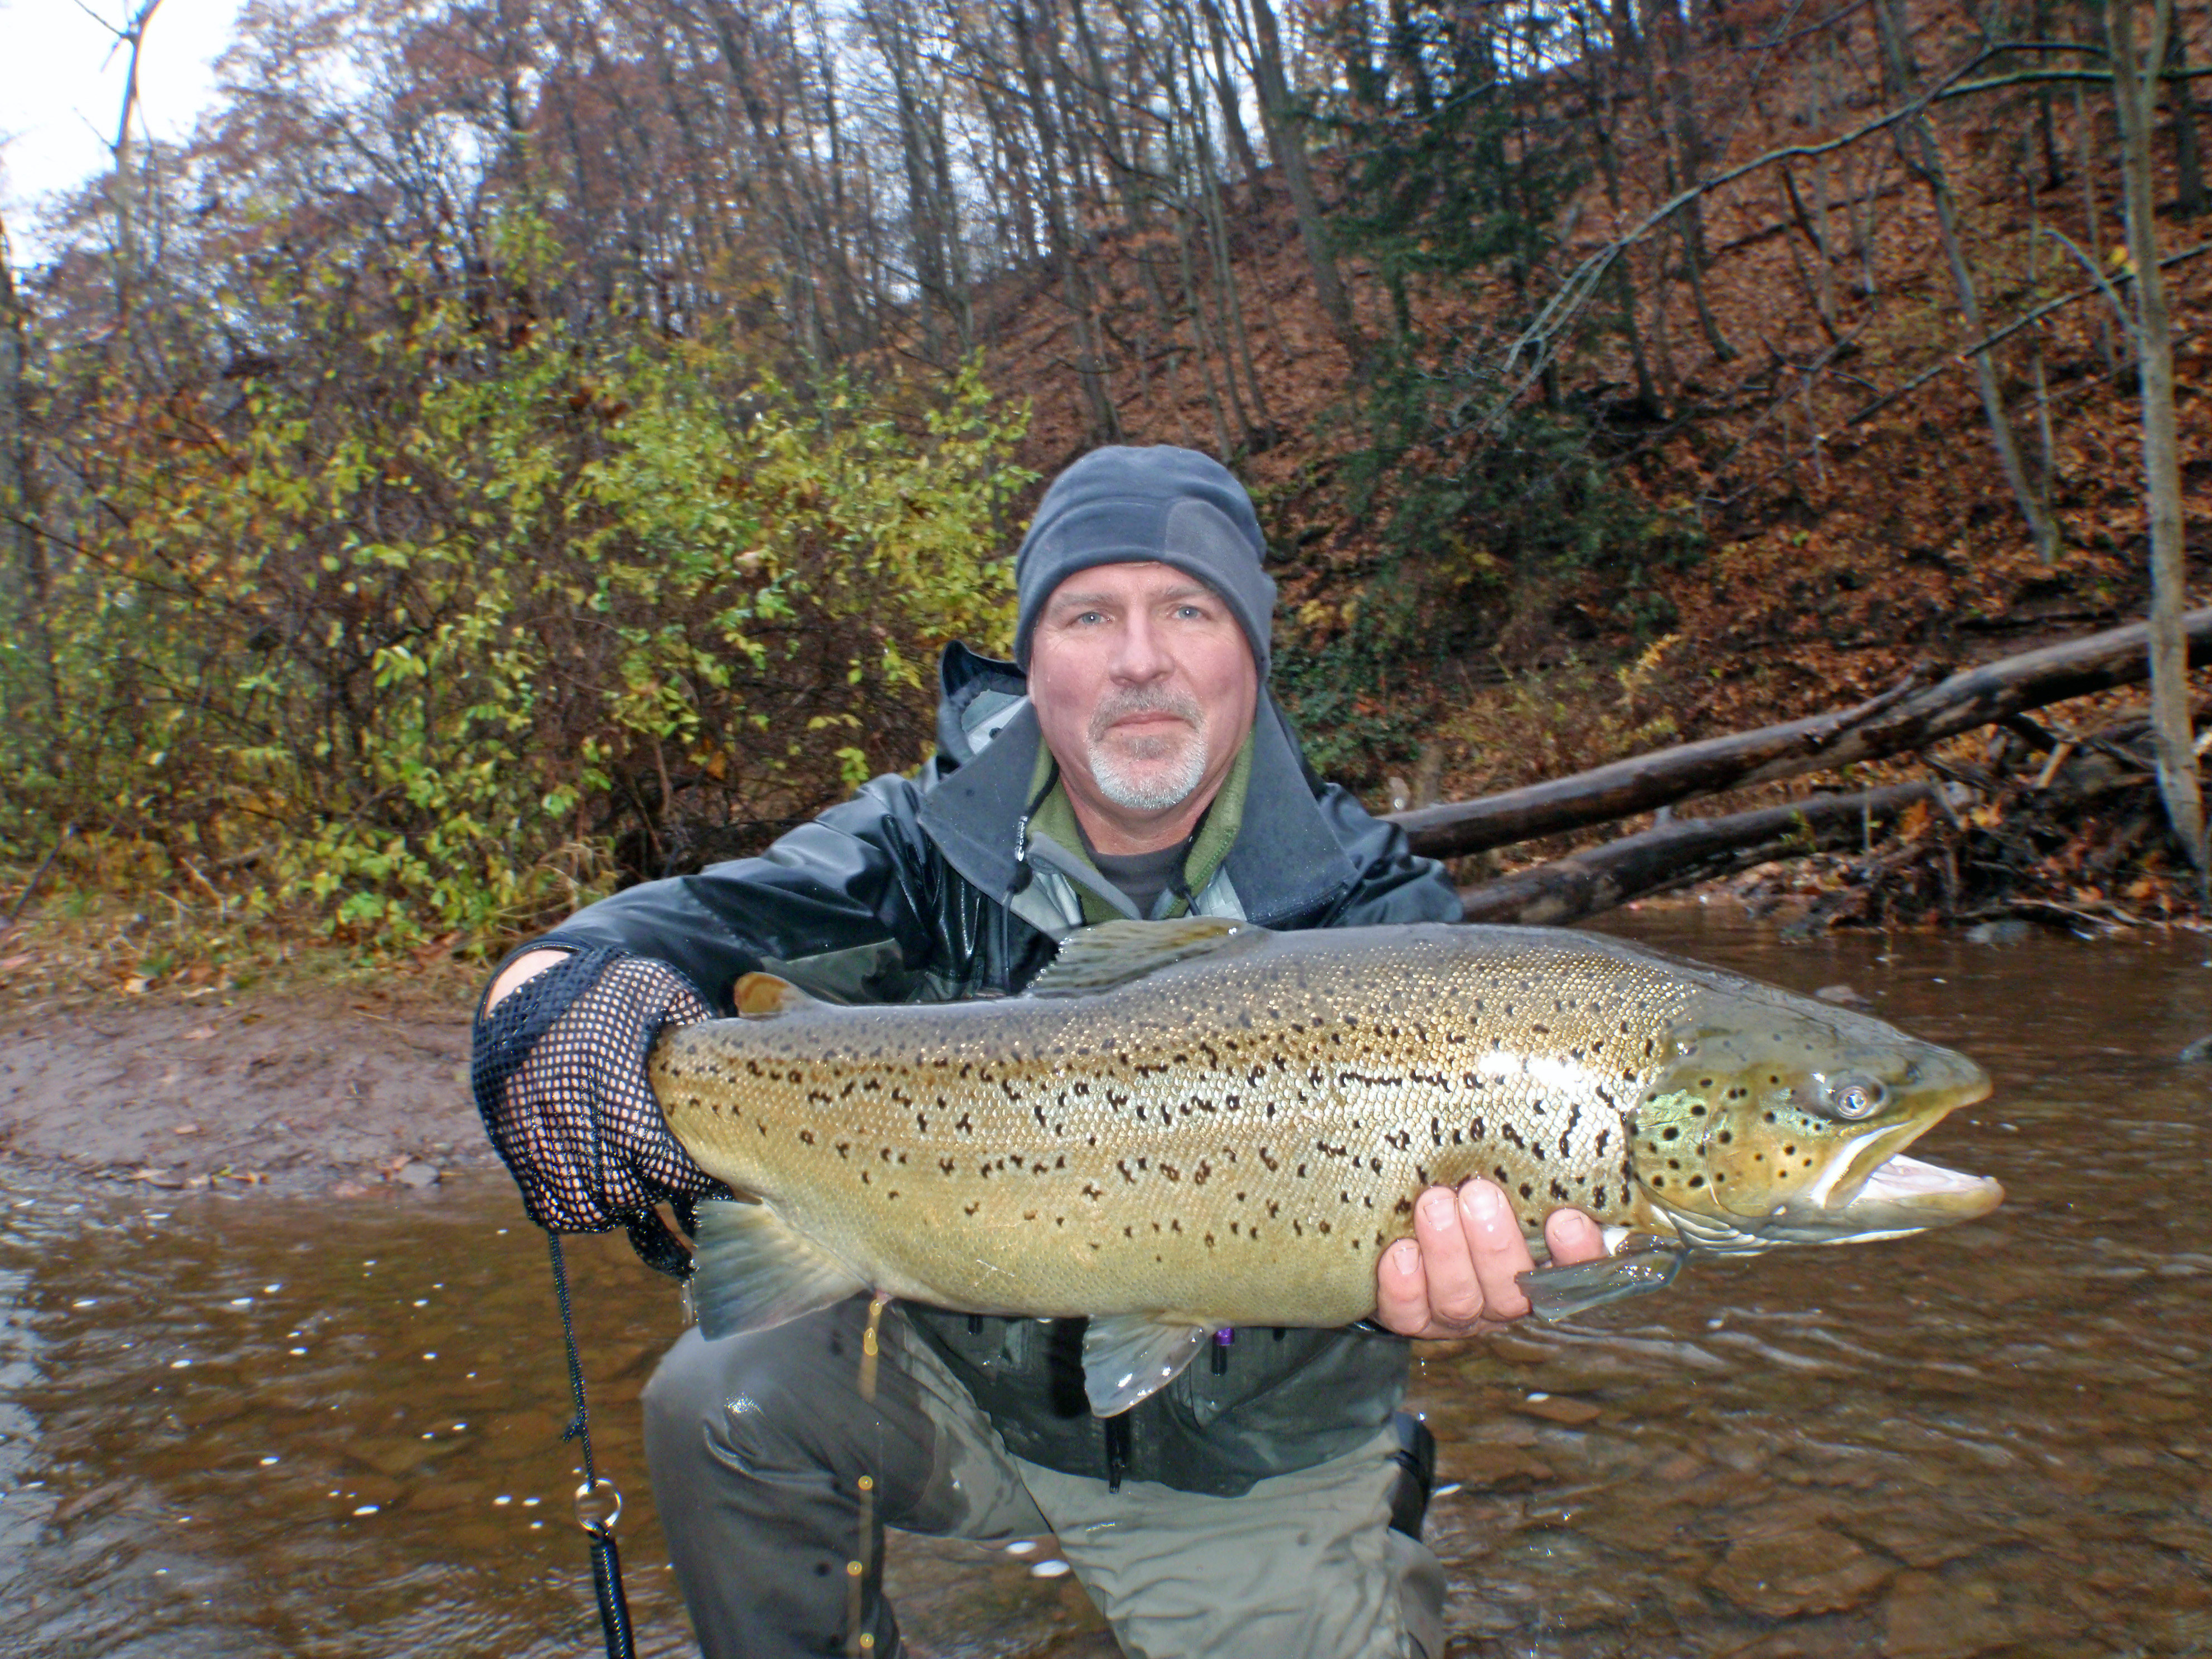 Oak Orchard River Guide Service: Brown Trout Fishing - Full Day